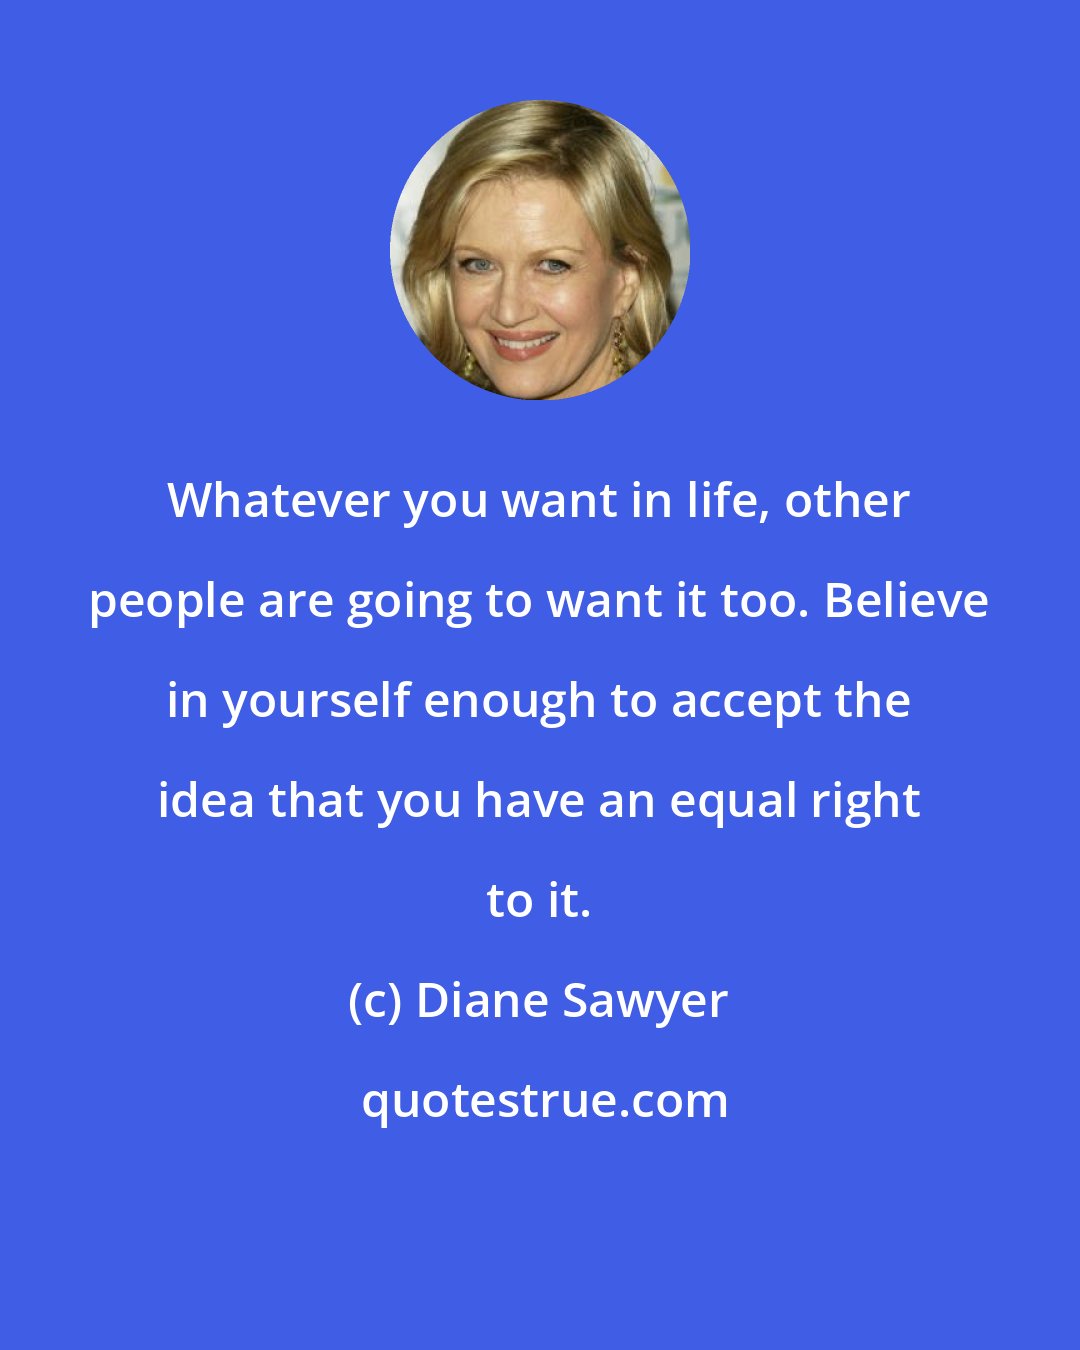 Diane Sawyer: Whatever you want in life, other people are going to want it too. Believe in yourself enough to accept the idea that you have an equal right to it.